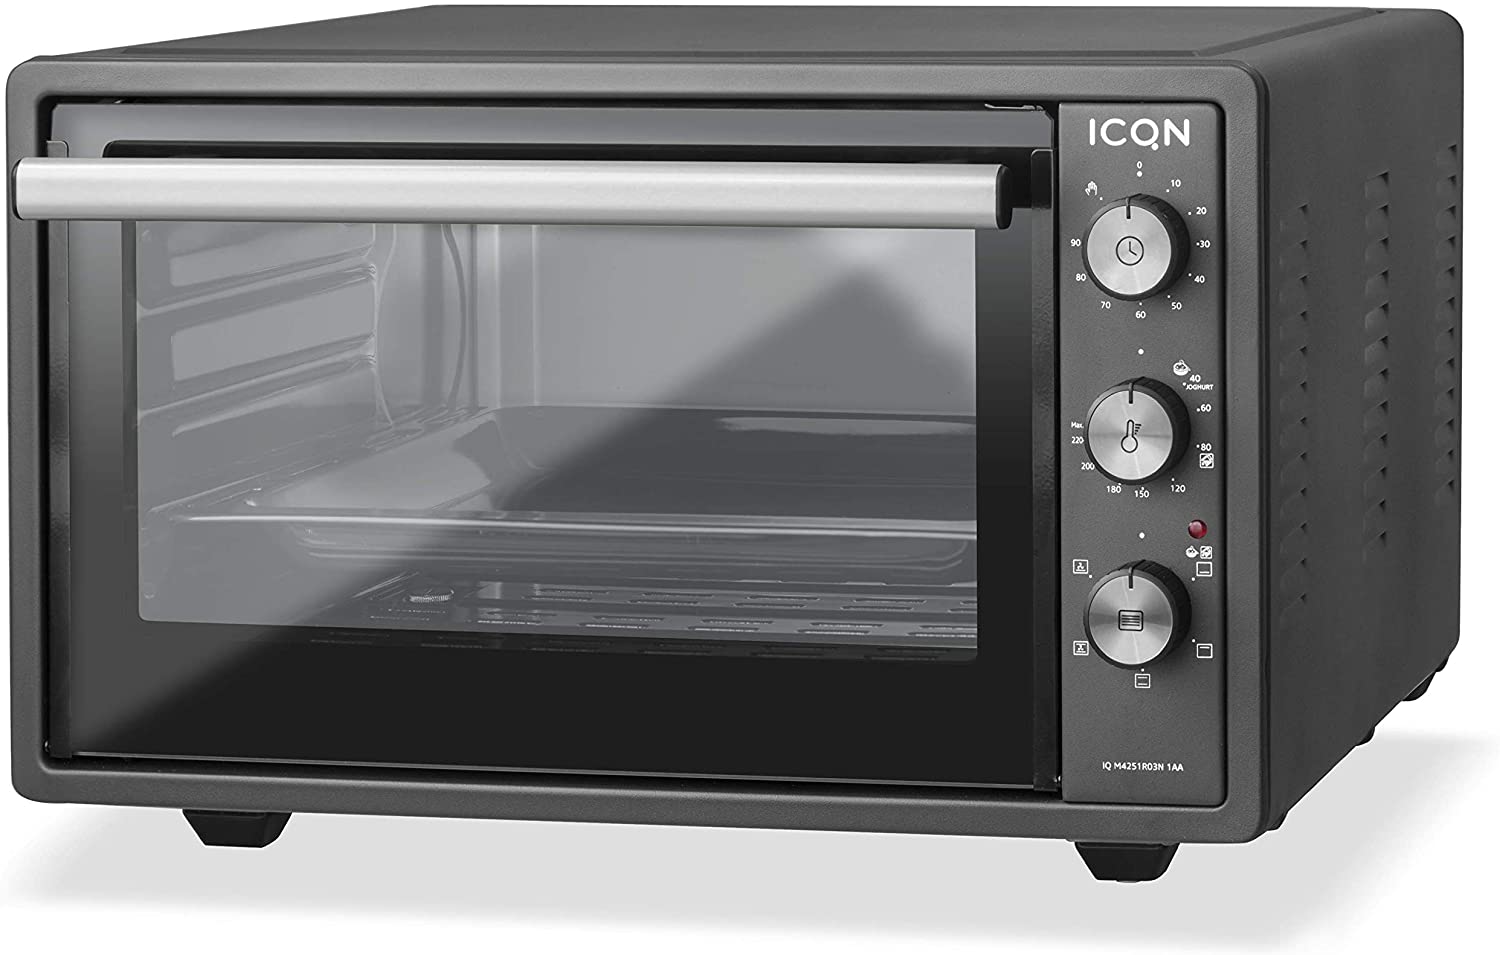 Icqn Mini Fan Oven, Pizza Oven, Mini Oven, Interior Lighting, Double Glazing, Timer Function, Enamelled, charcoal